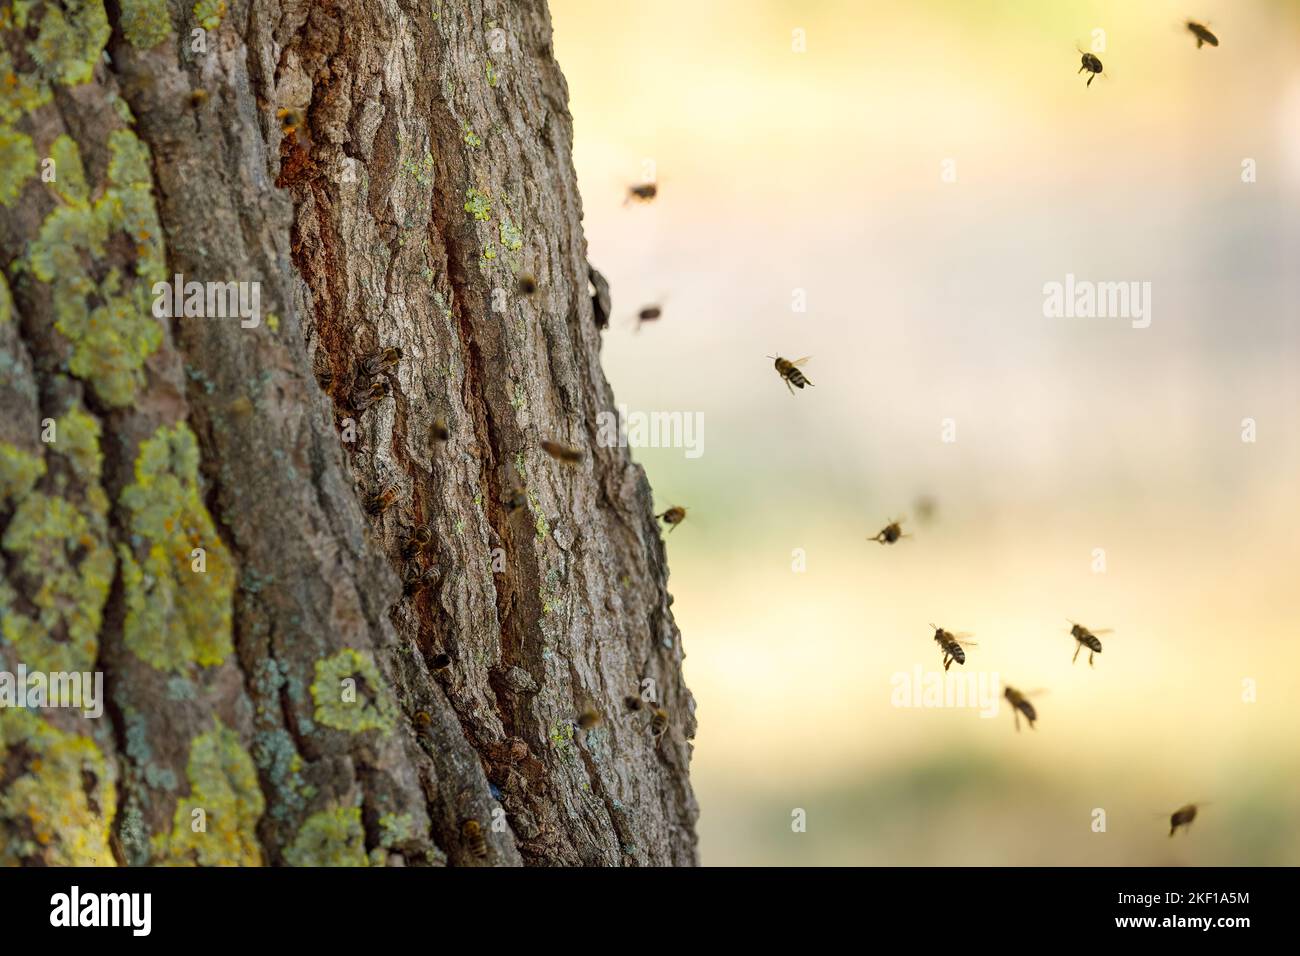 A nest of wild bees Stock Photo